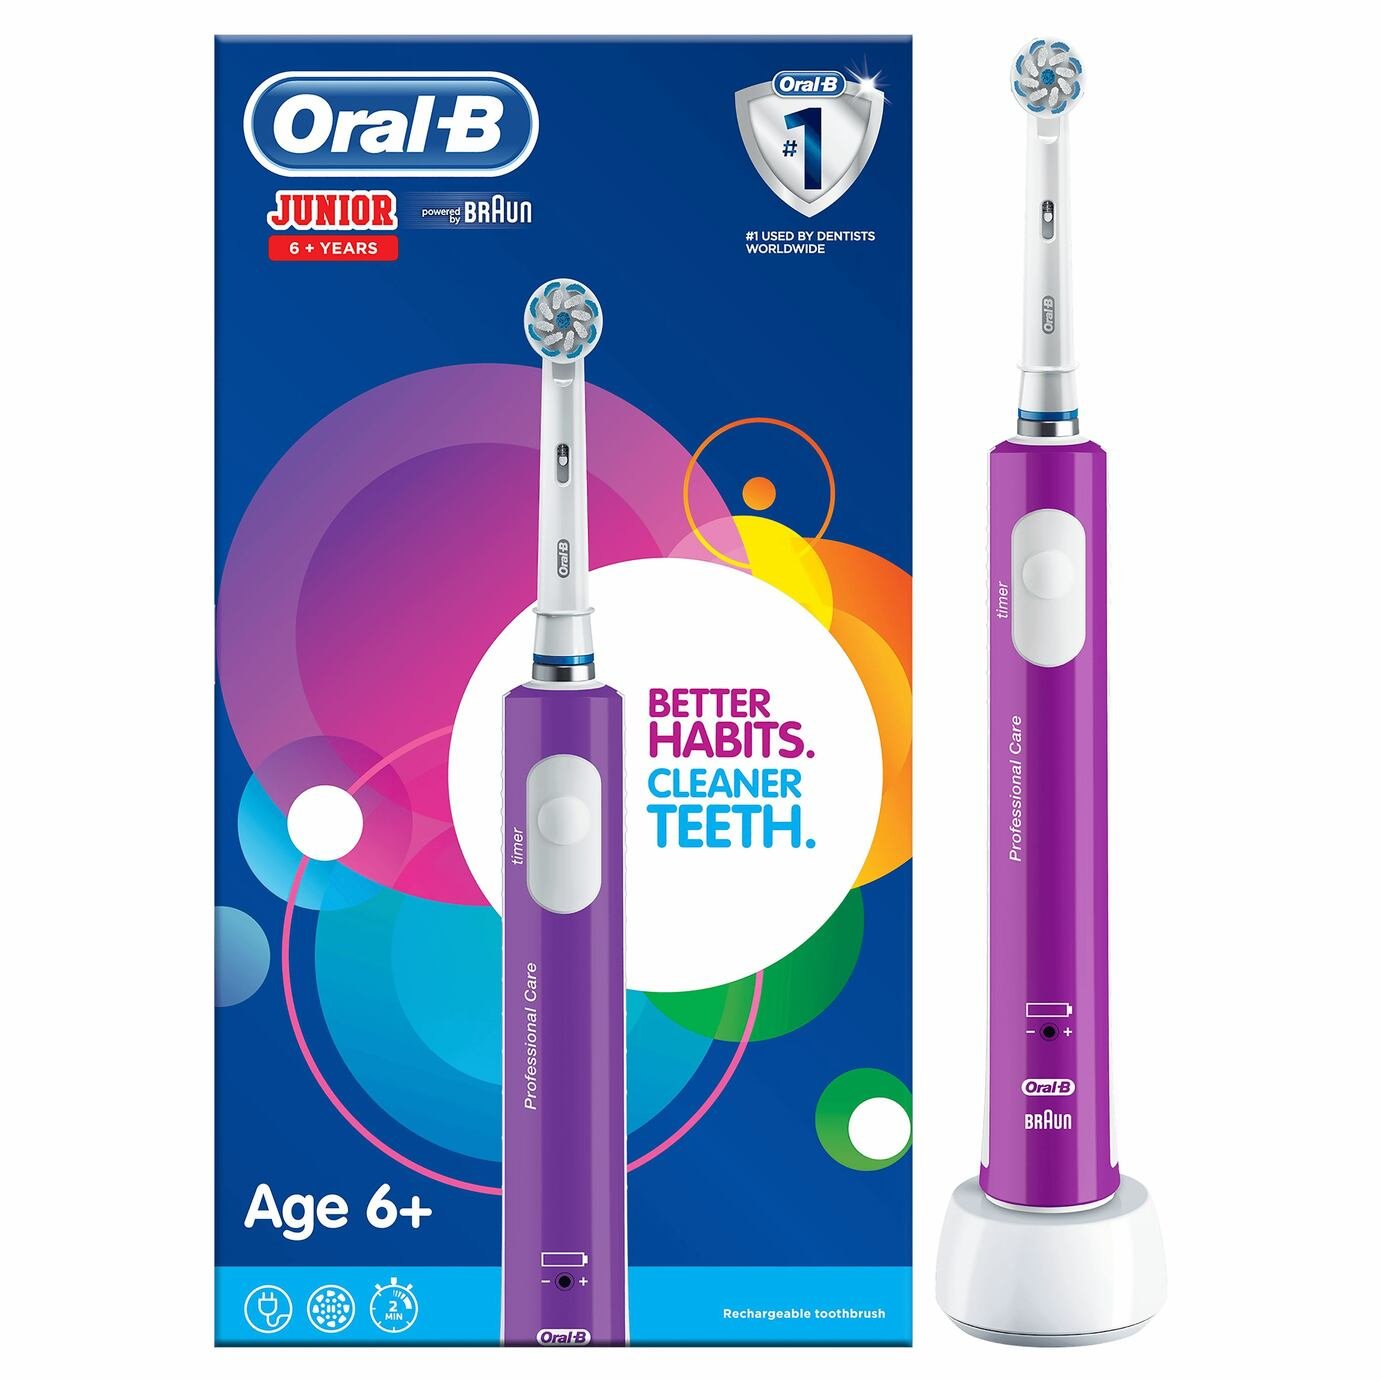 Oral-B Junior Kids Electric Toothbrush - Ages 6-12